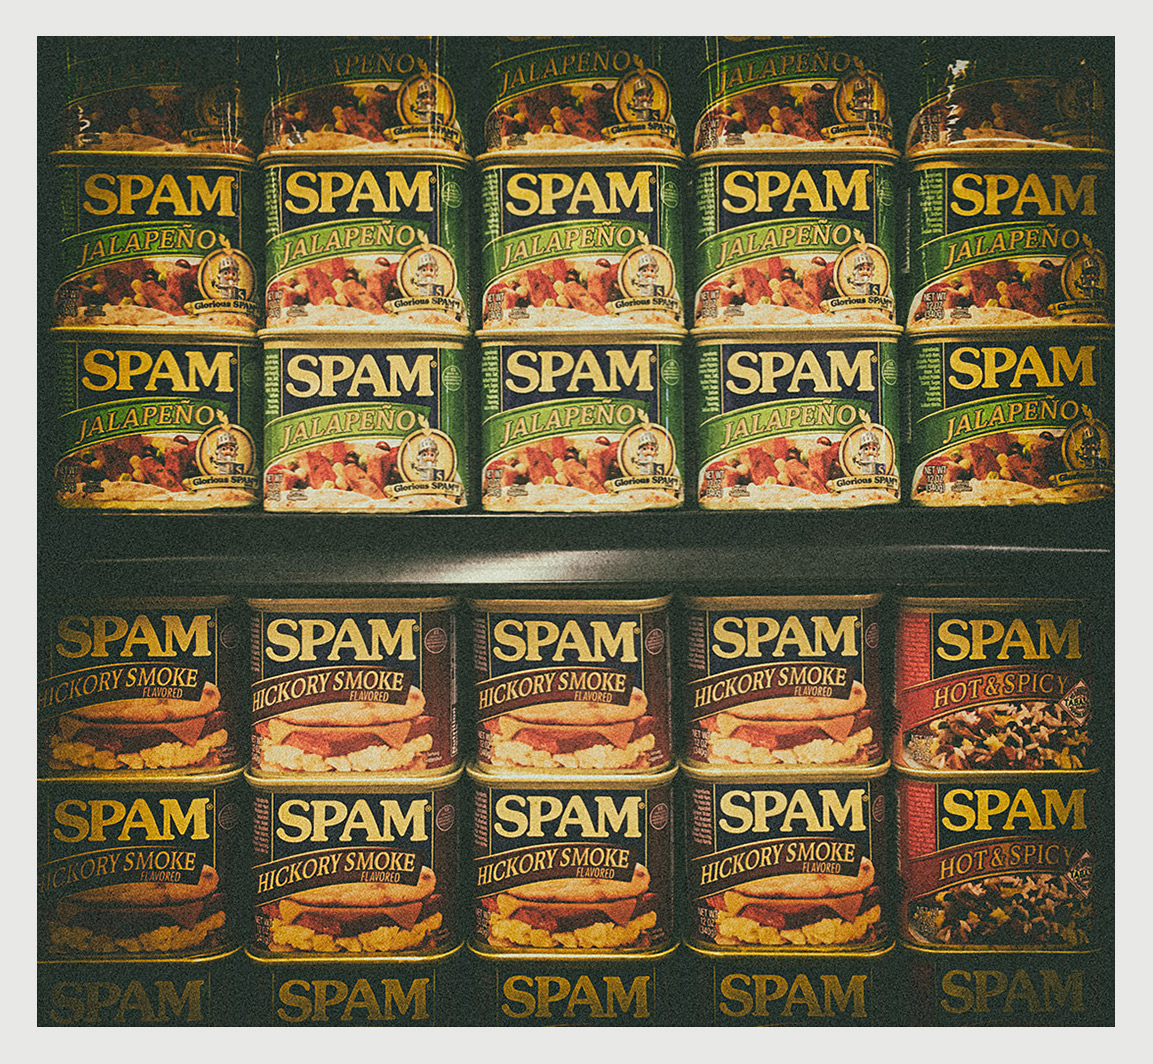 This Ain't Your Grandma's Spam